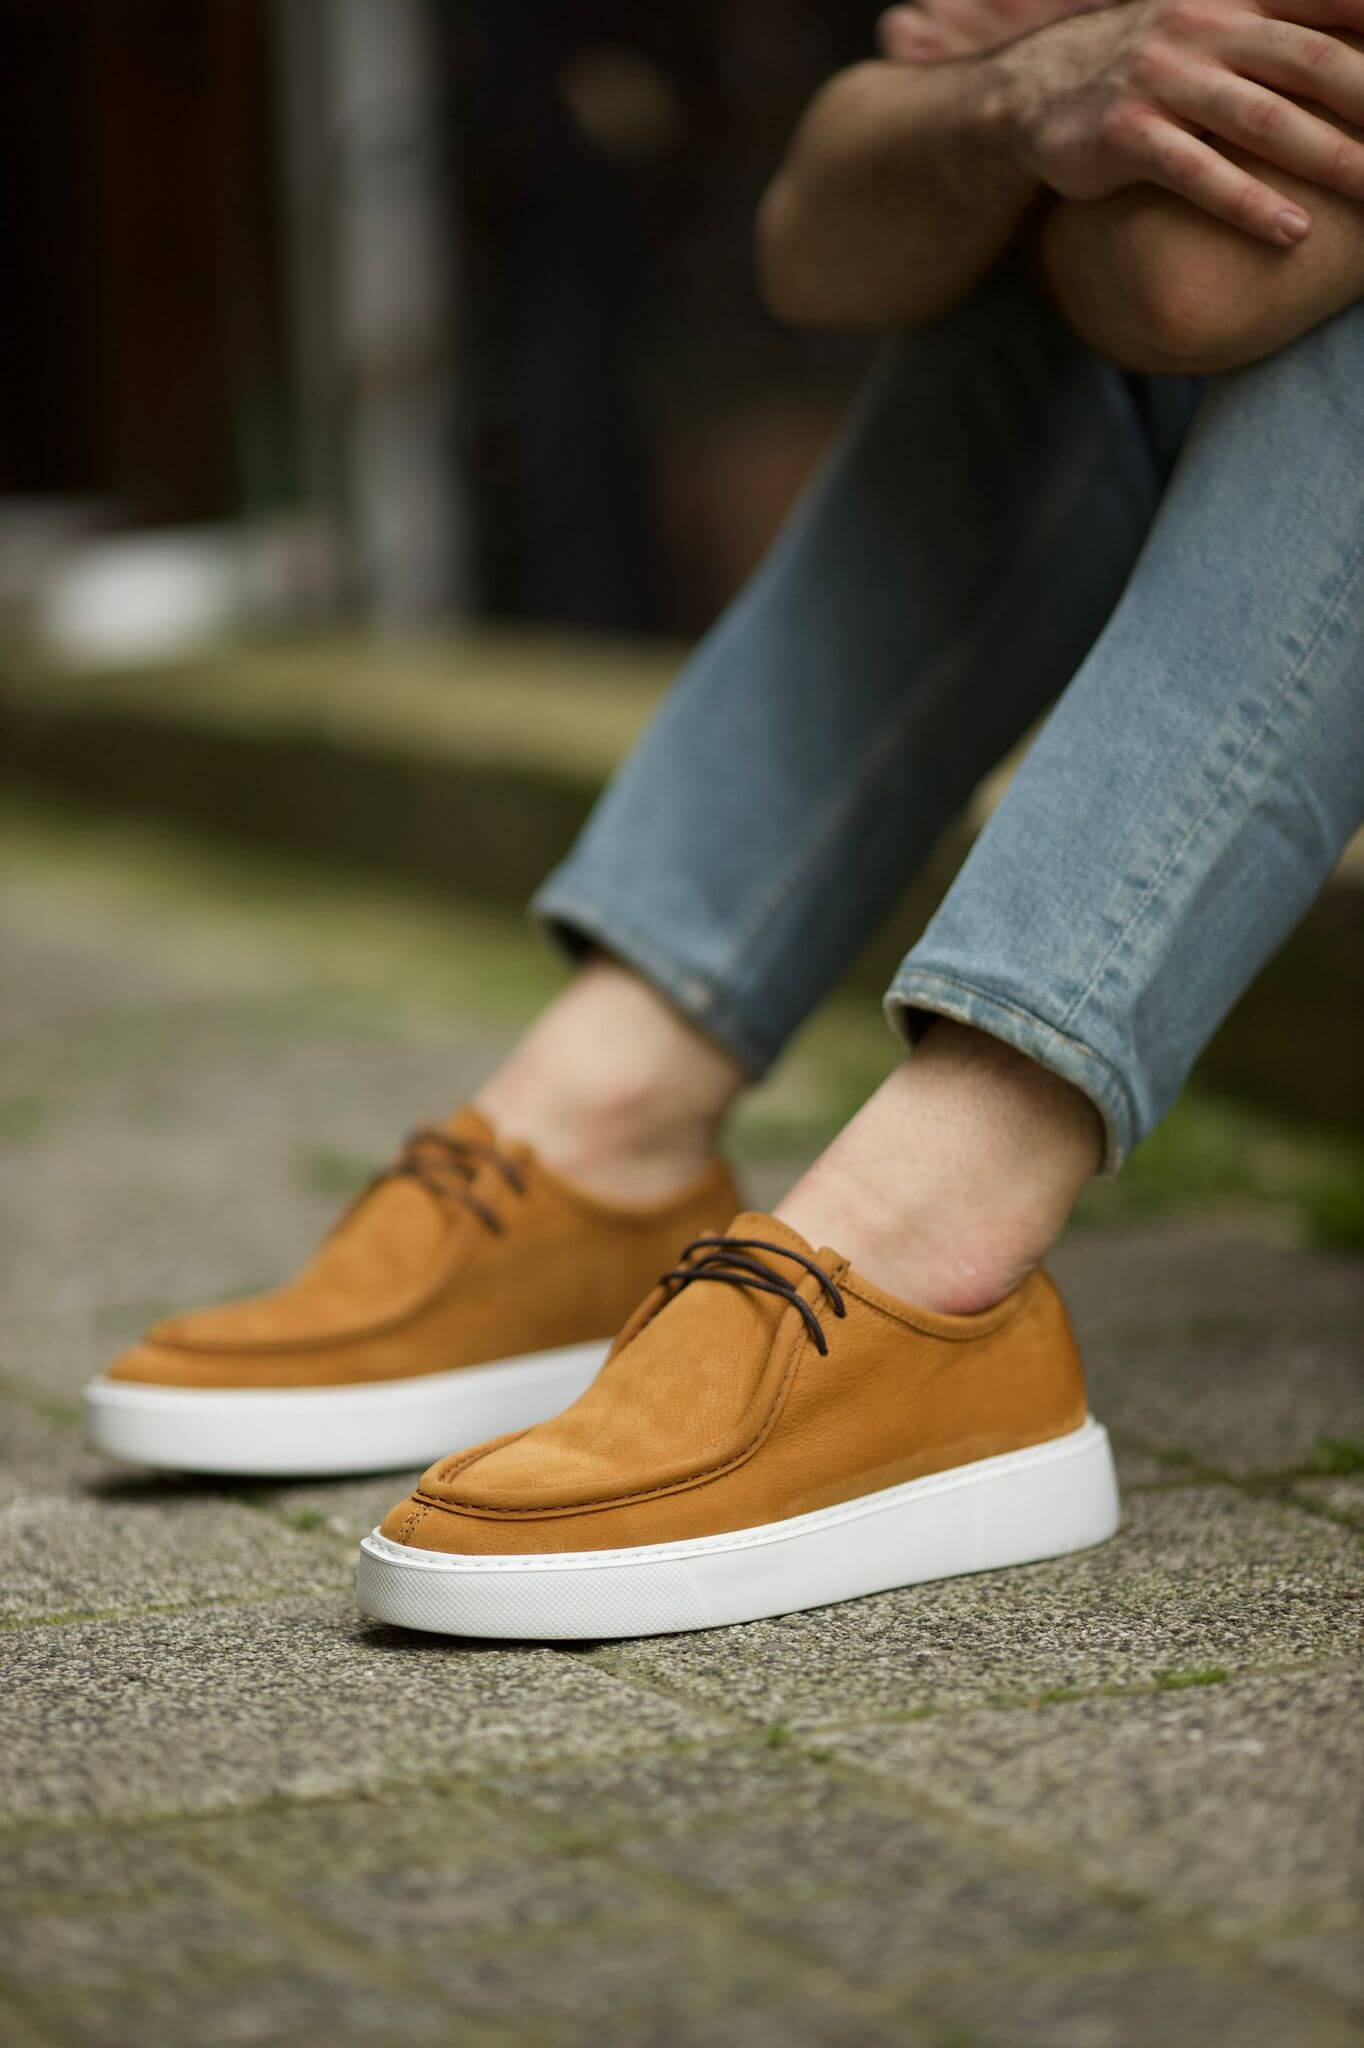 A Camel Casual Lace Up Shoe  on display.